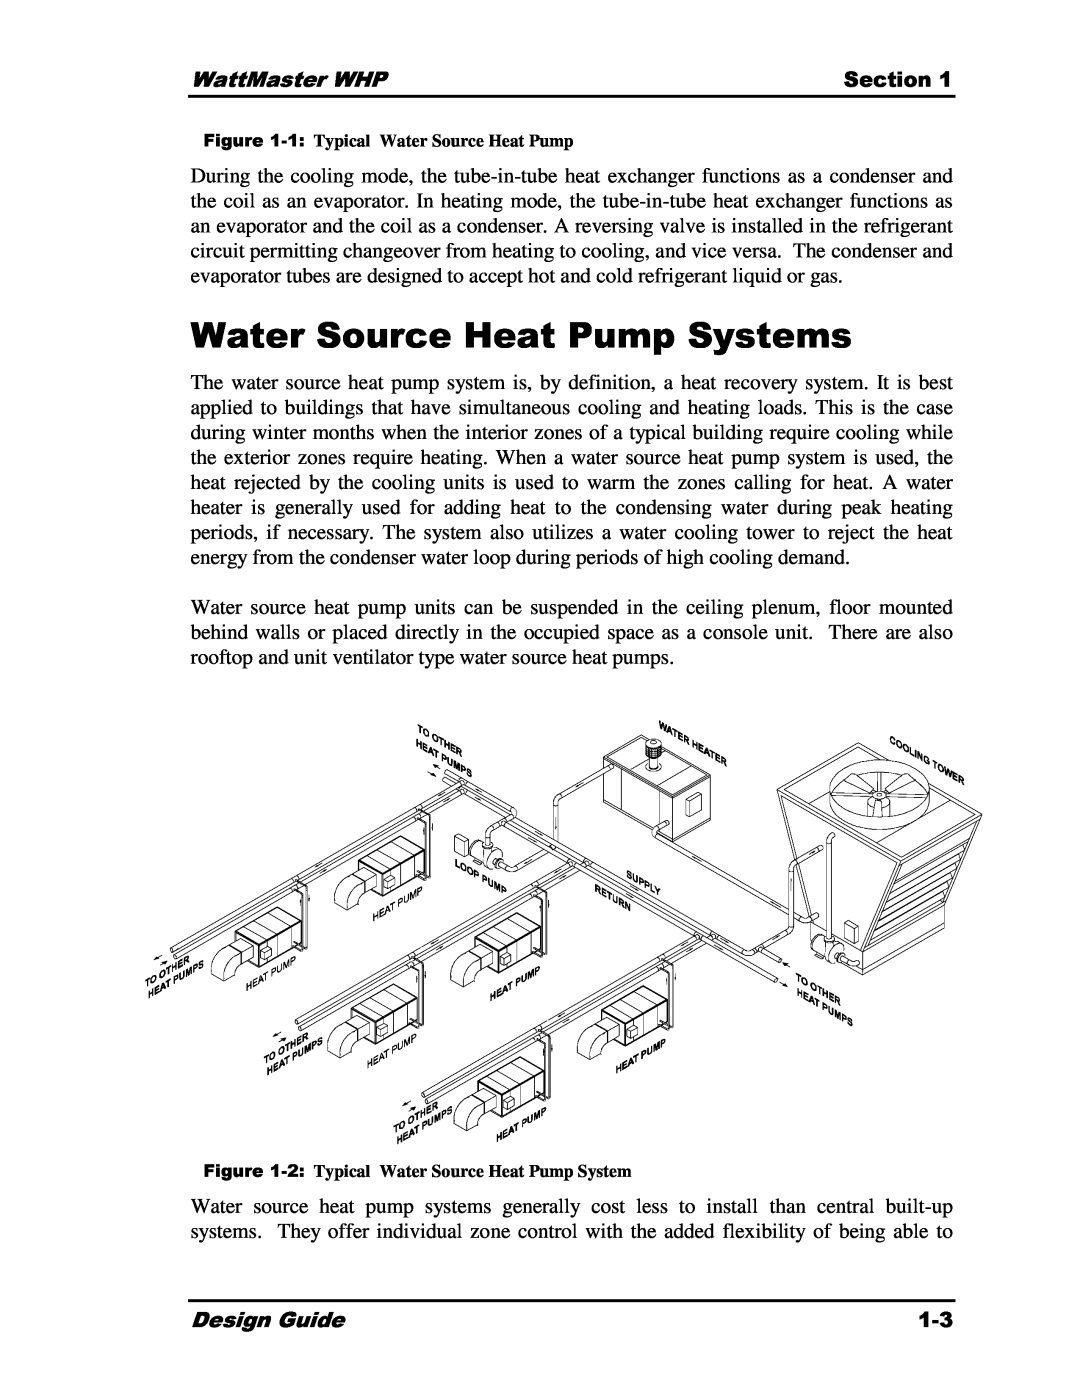 Heat Controller manual 2, Water Source Heat Pump Systems 